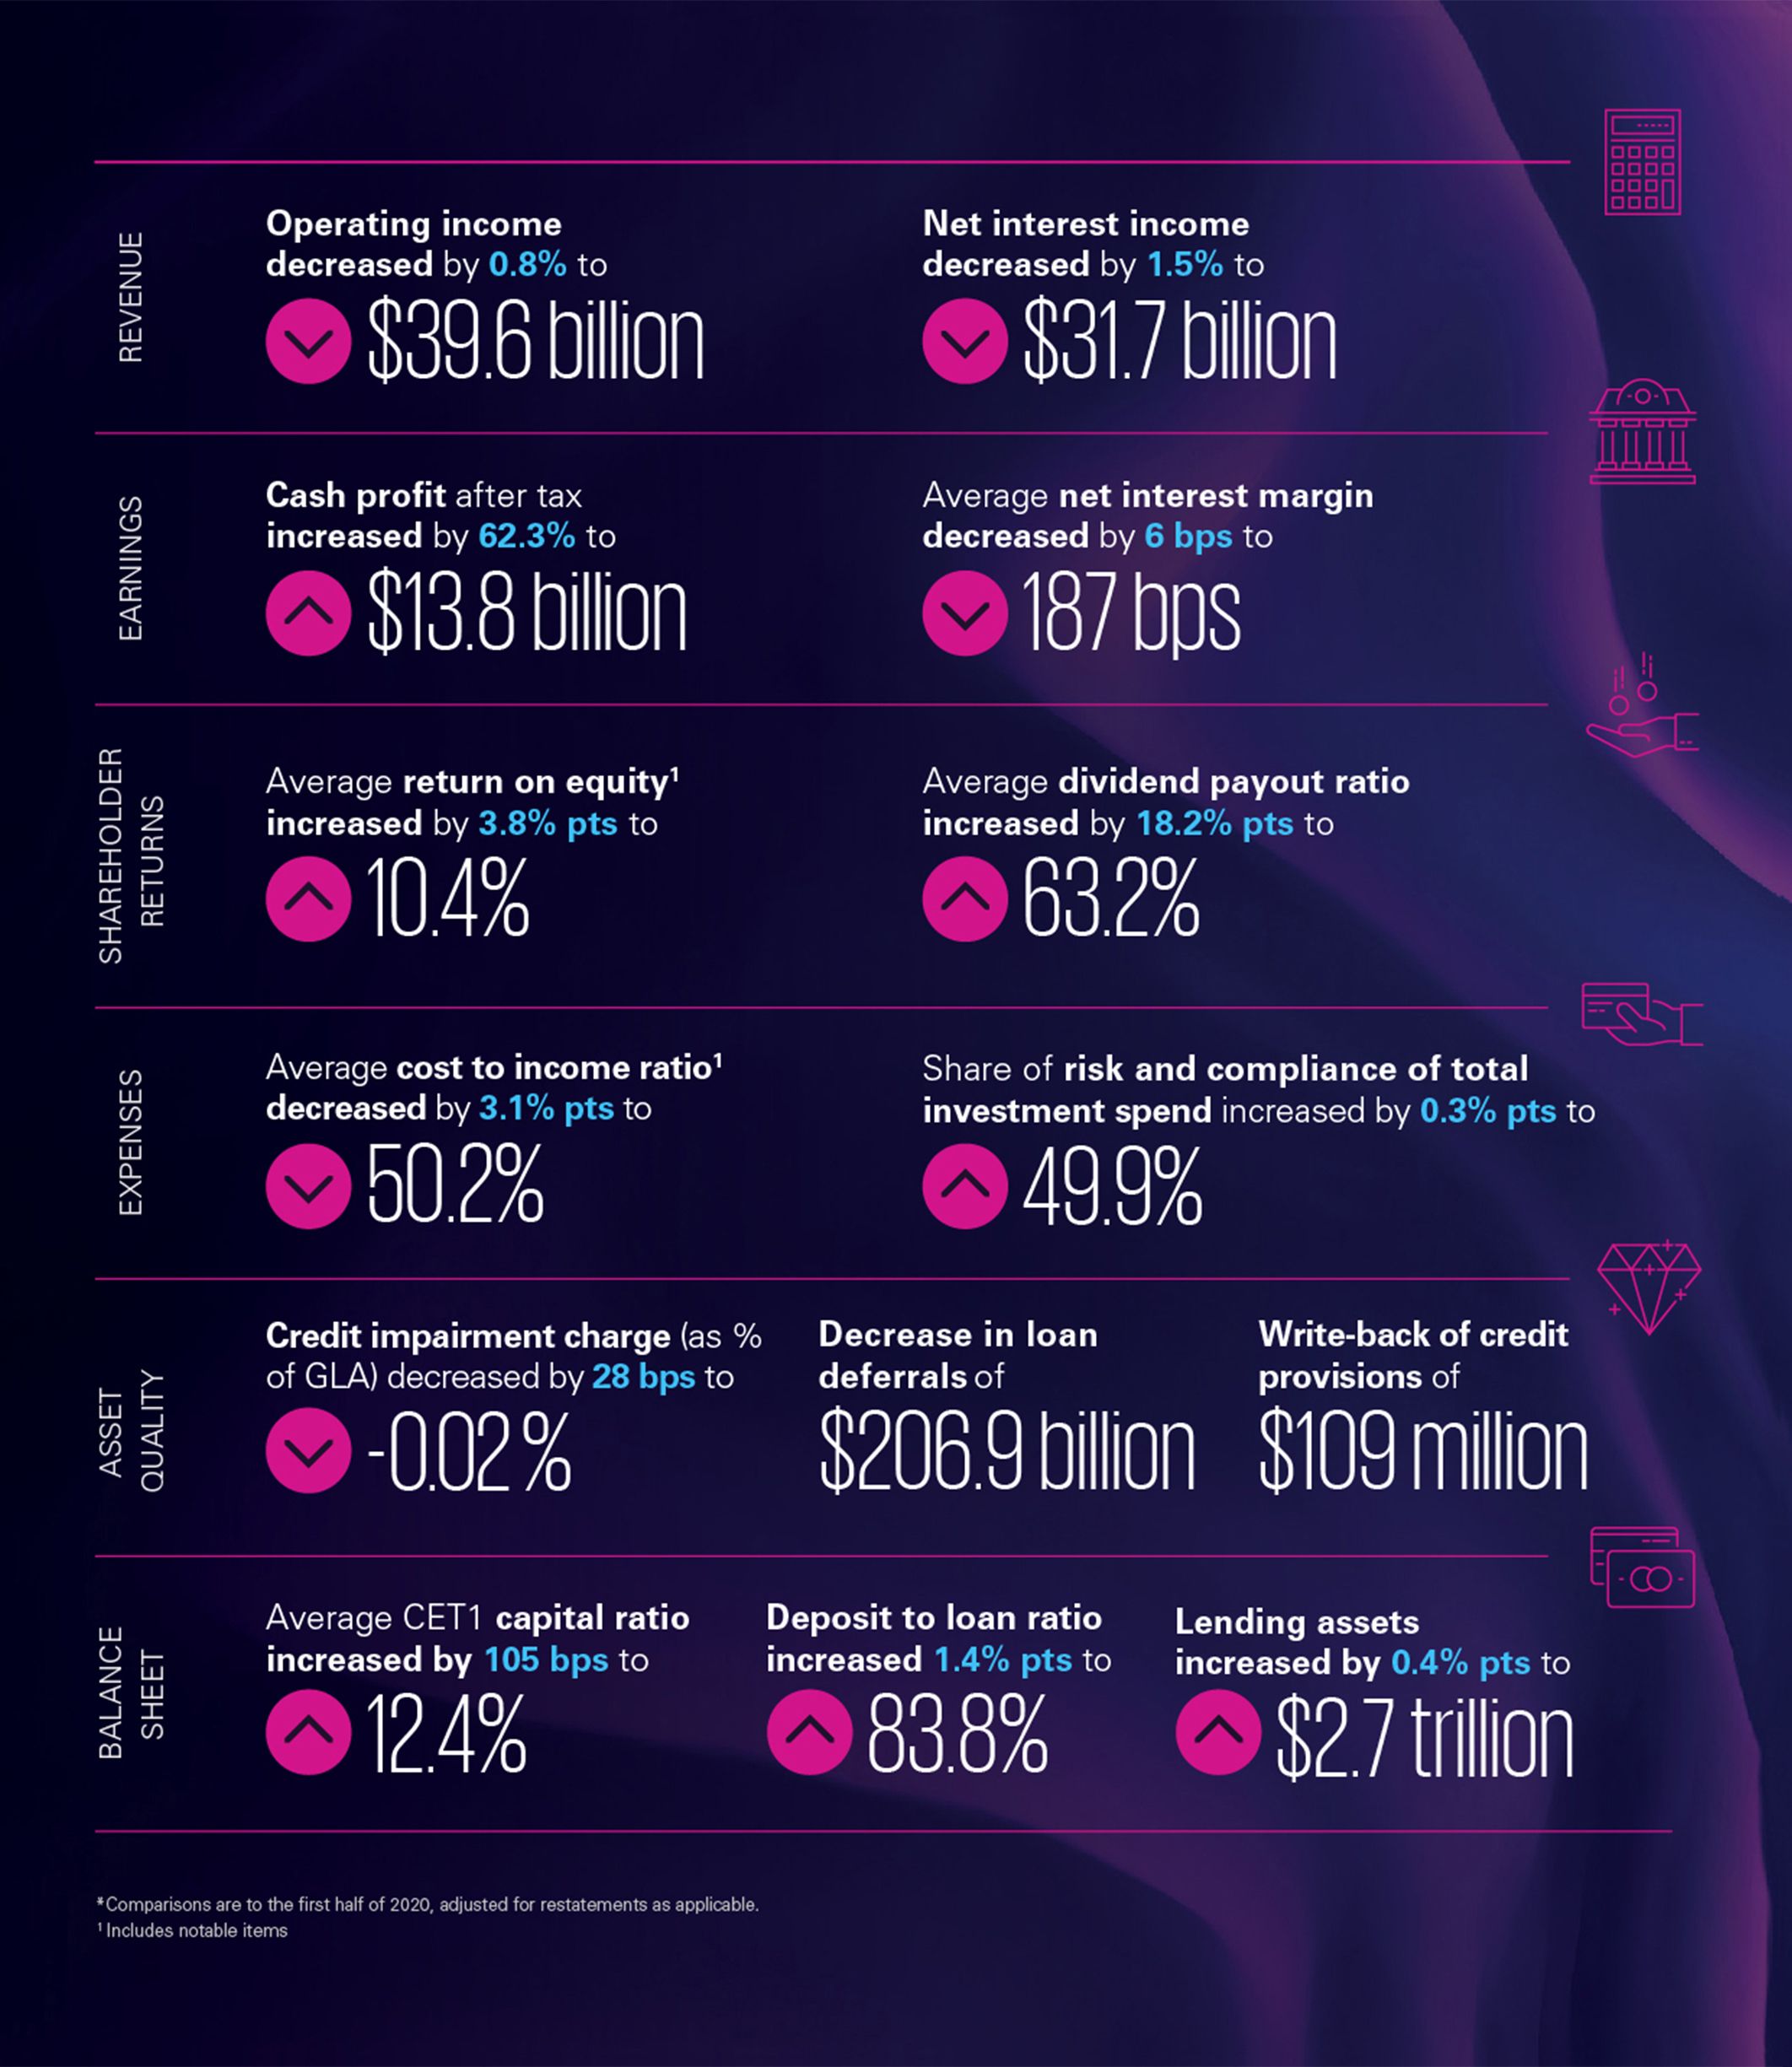 An infographic snapshot of the major Australian bank's full year financial results.